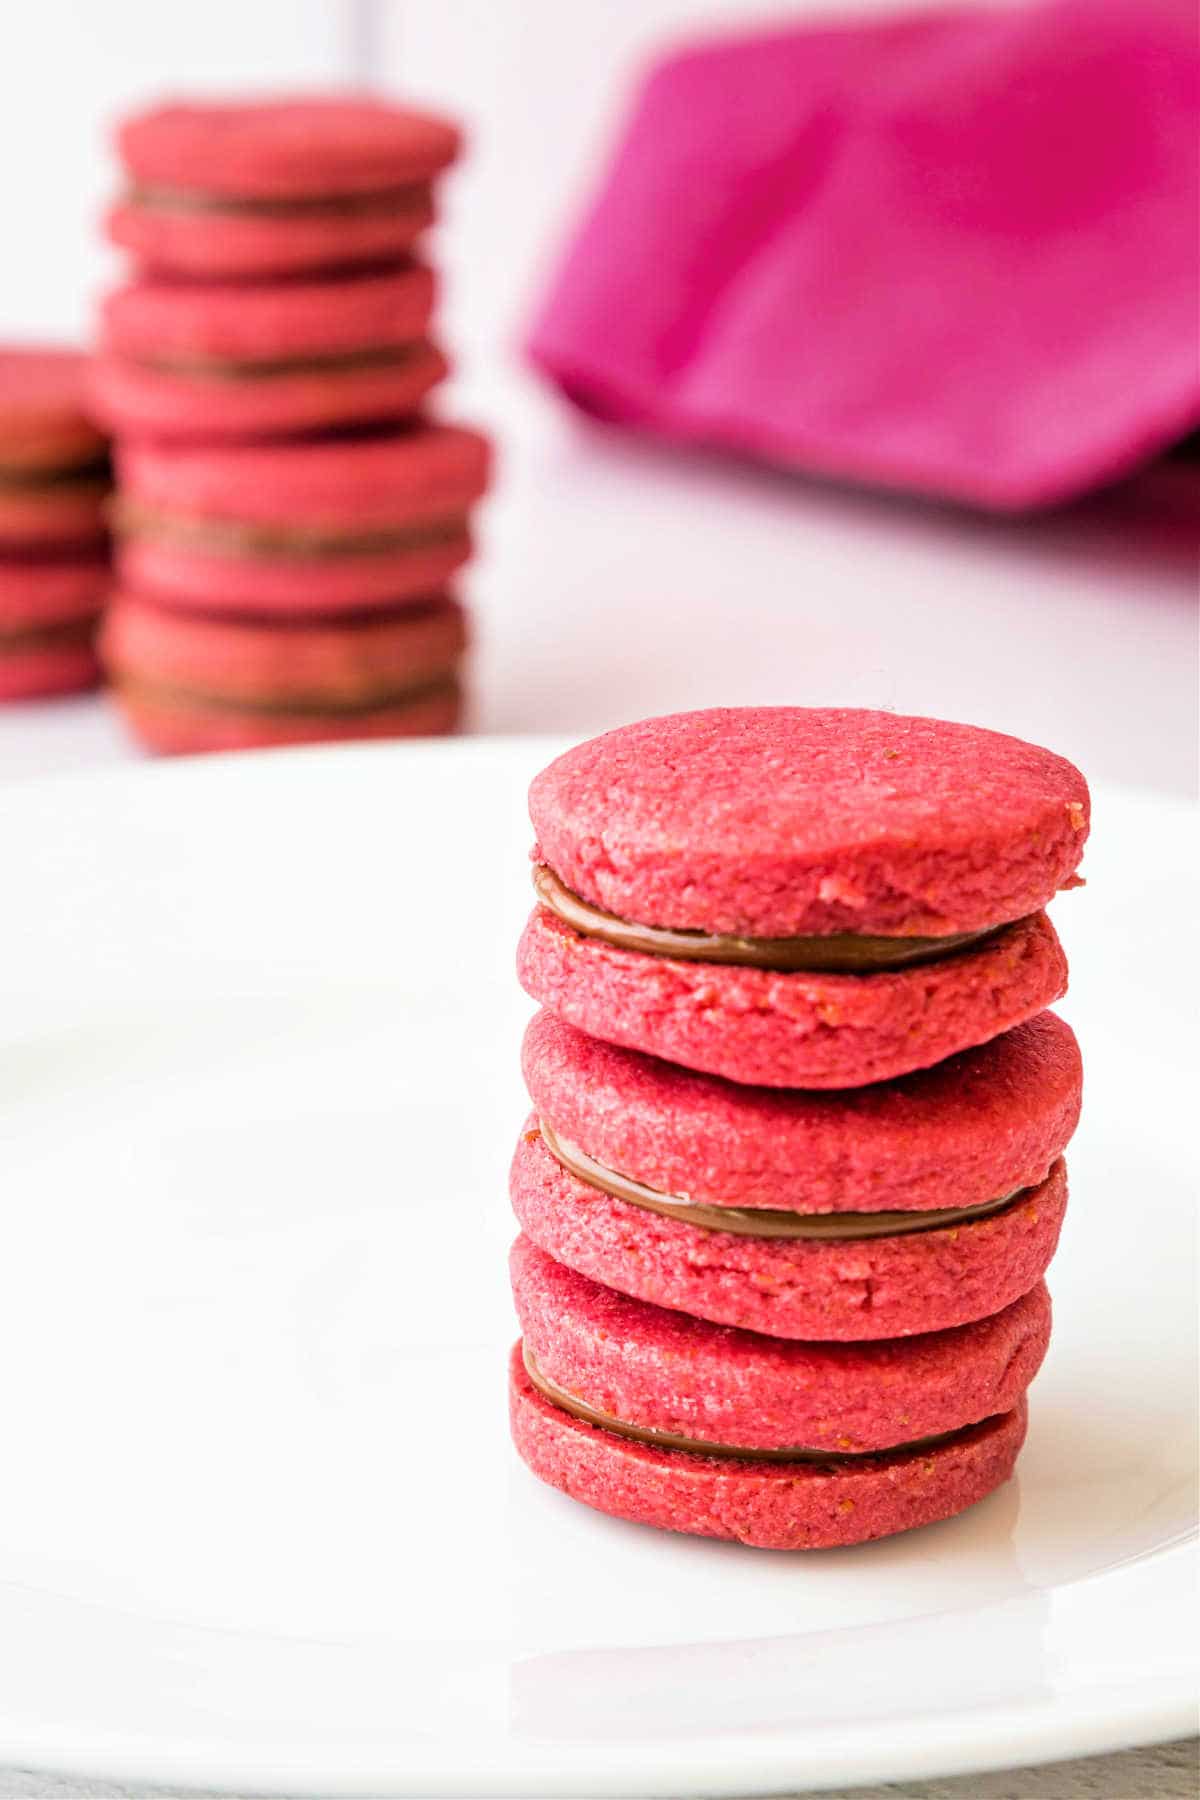 Vertical image of 3 raspberry pink sandwich cookies with chocolate filling stacked on a white plate with more stacks of cookies in the background.